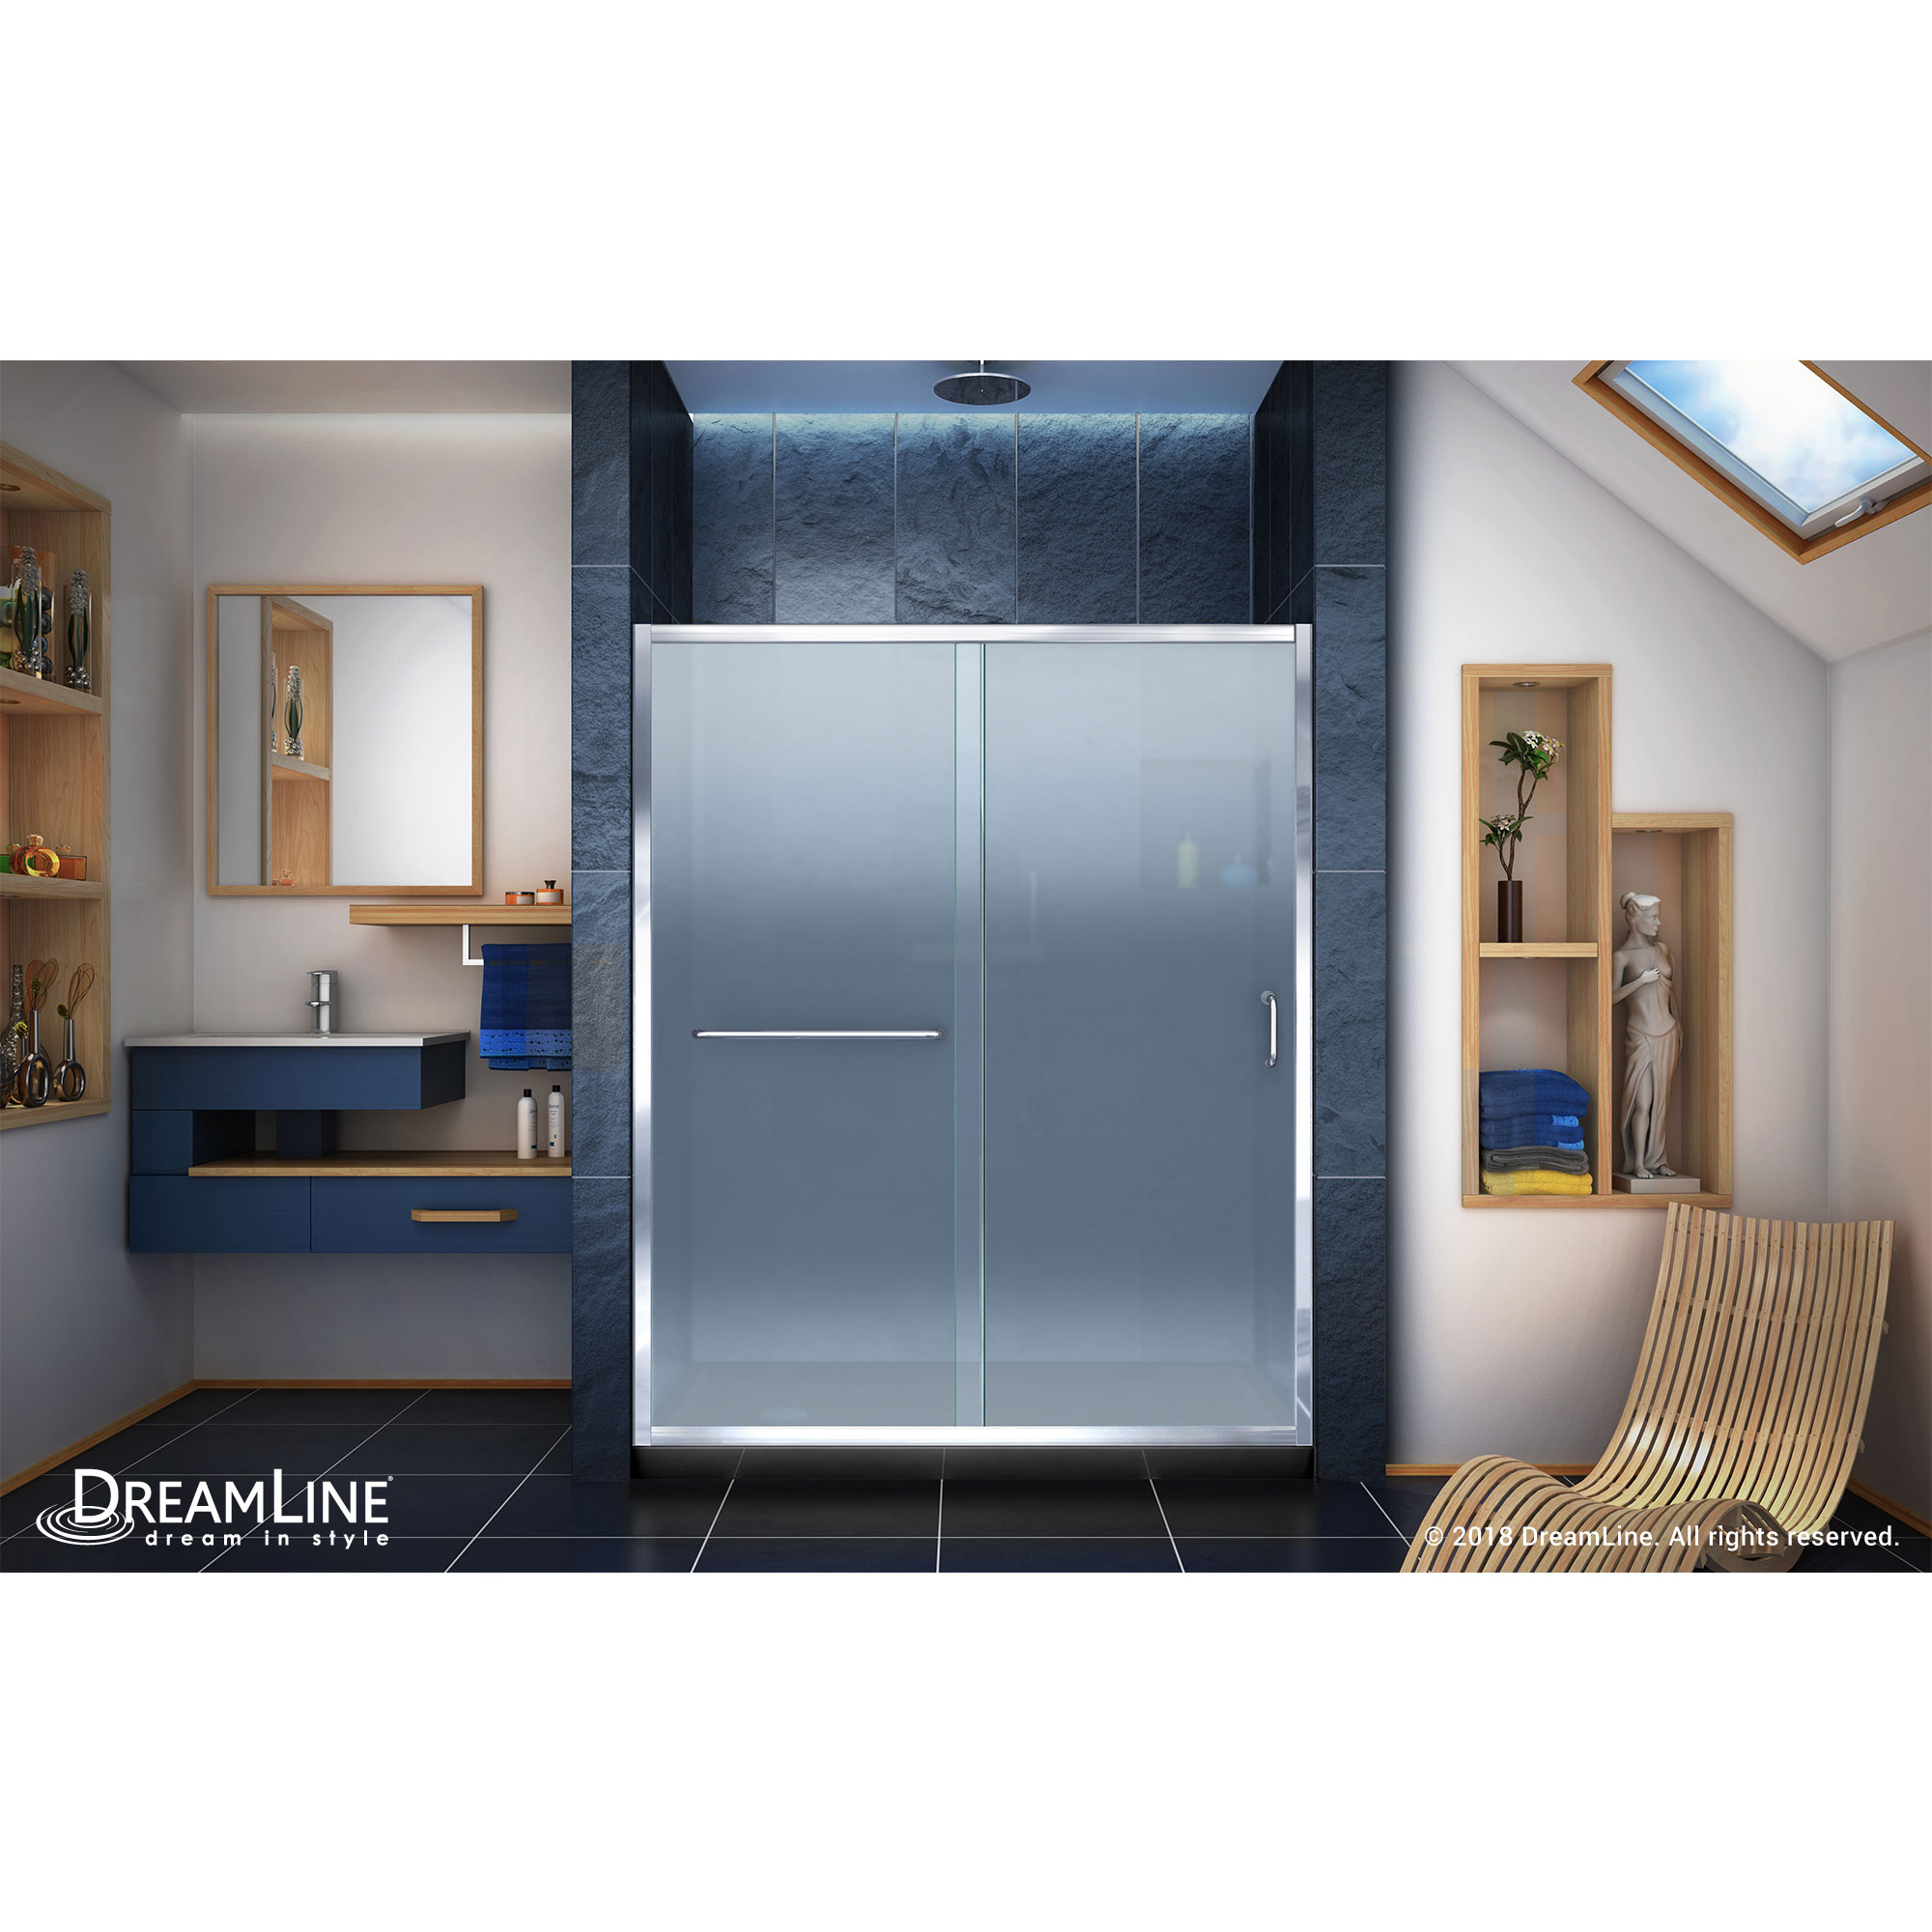 DreamLine Infinity-Z 32 in. D x 60 in. W x 74 3/4 in. H Frosted Sliding Shower Door in Chrome and Left Drain Black Base